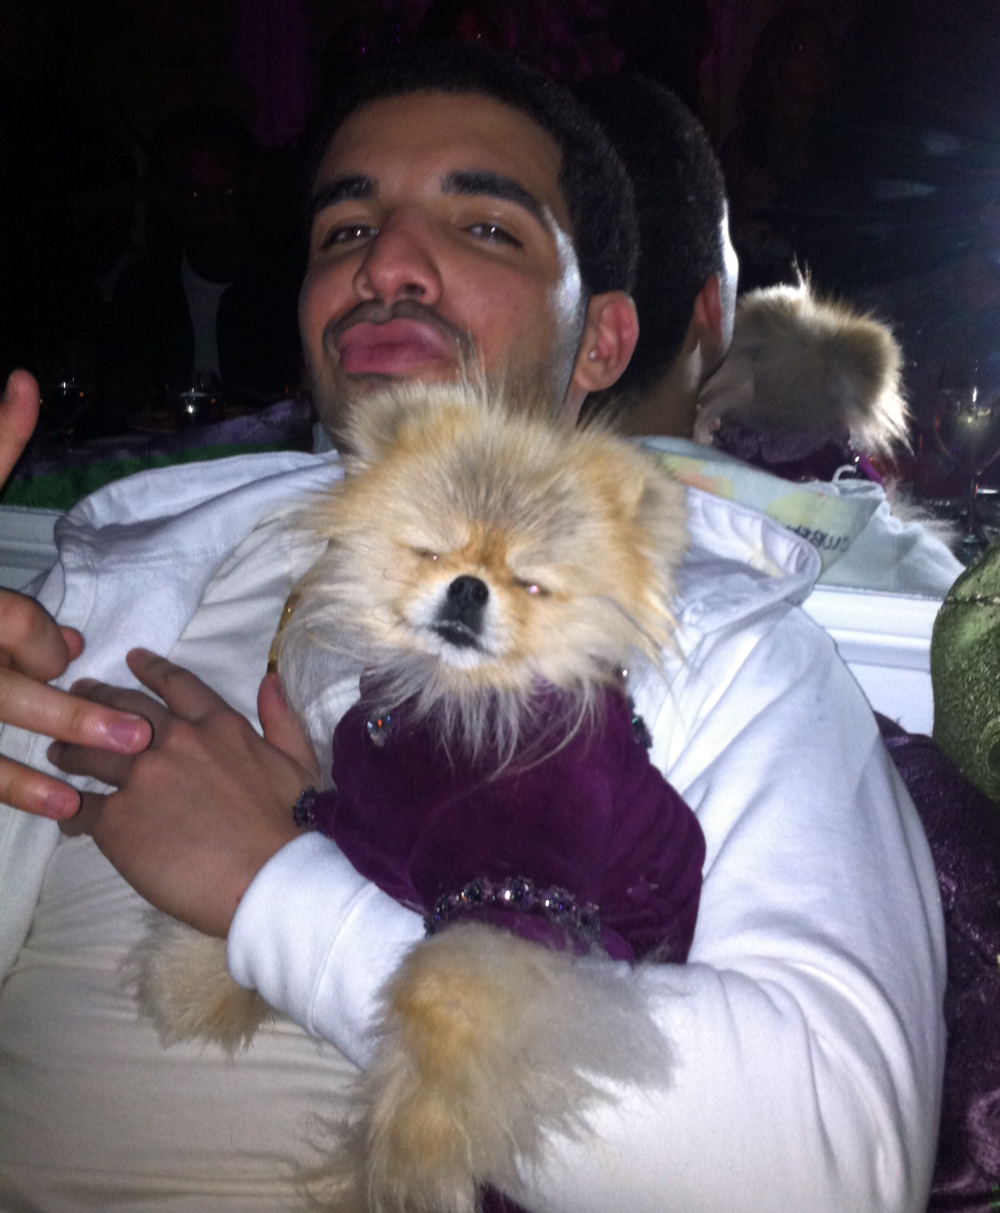 Drake sitting with his Pomeranian in his arms